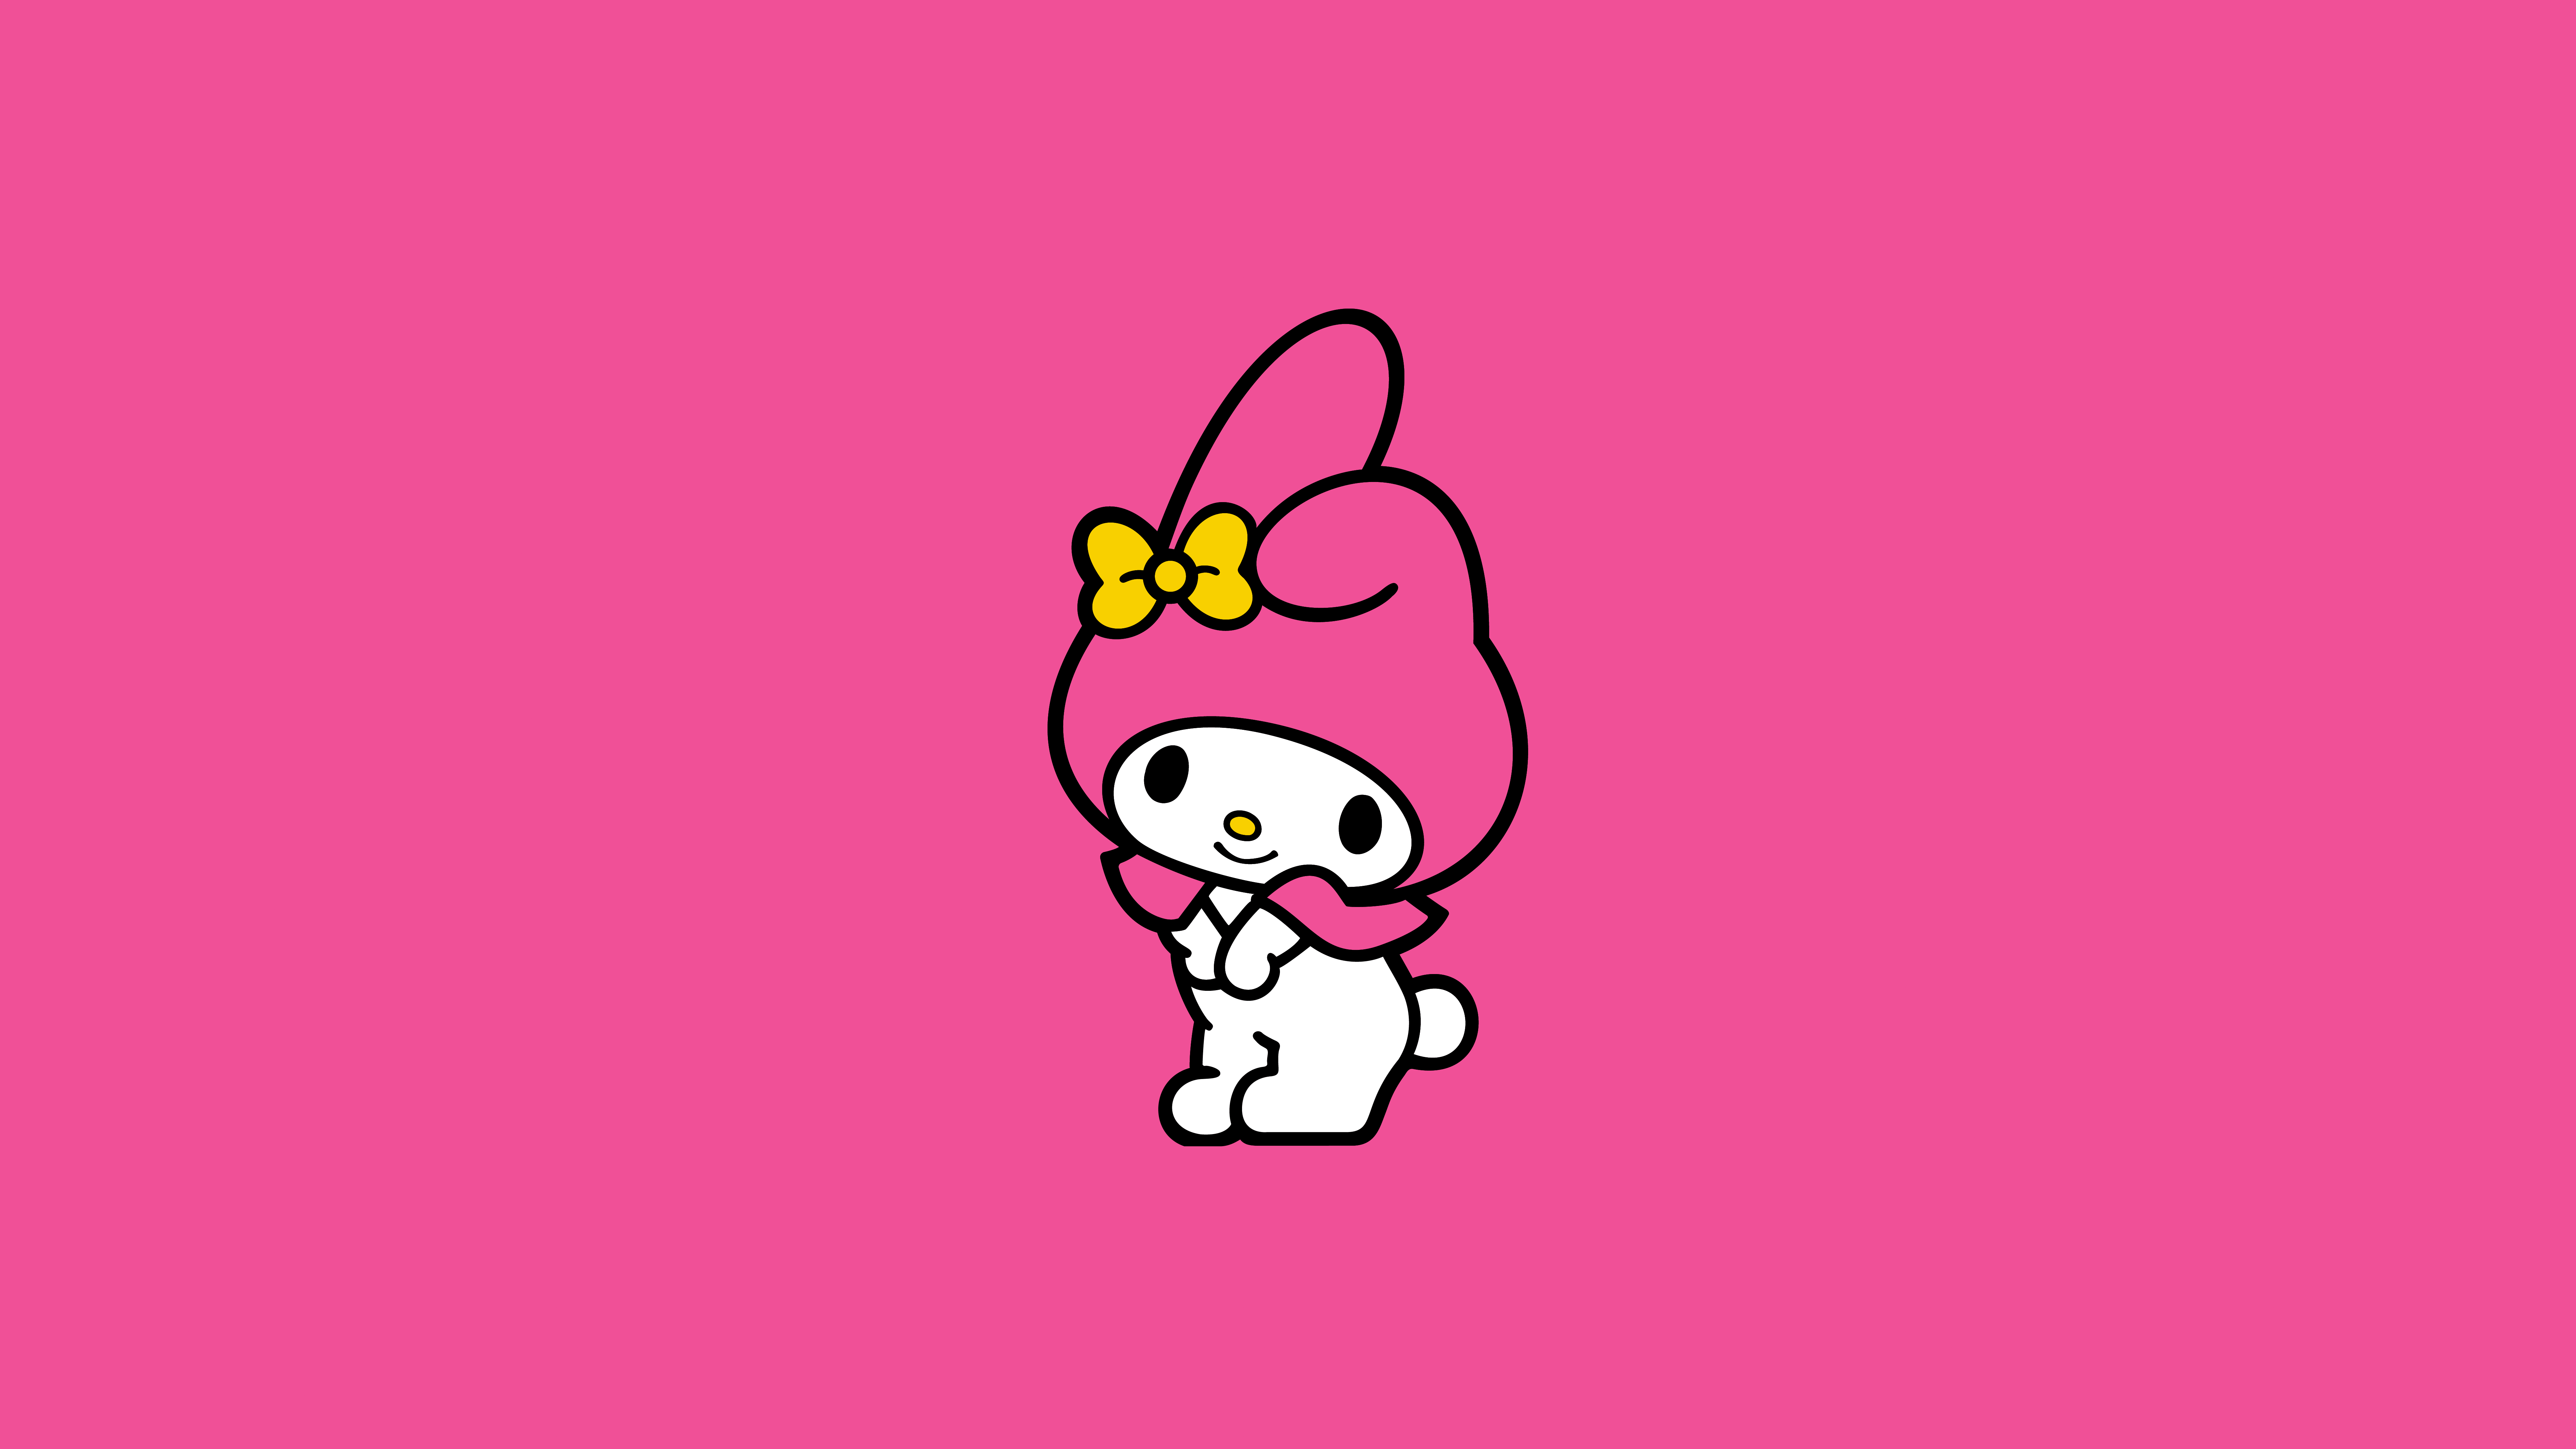 My Melody Wallpapers on WallpaperDog